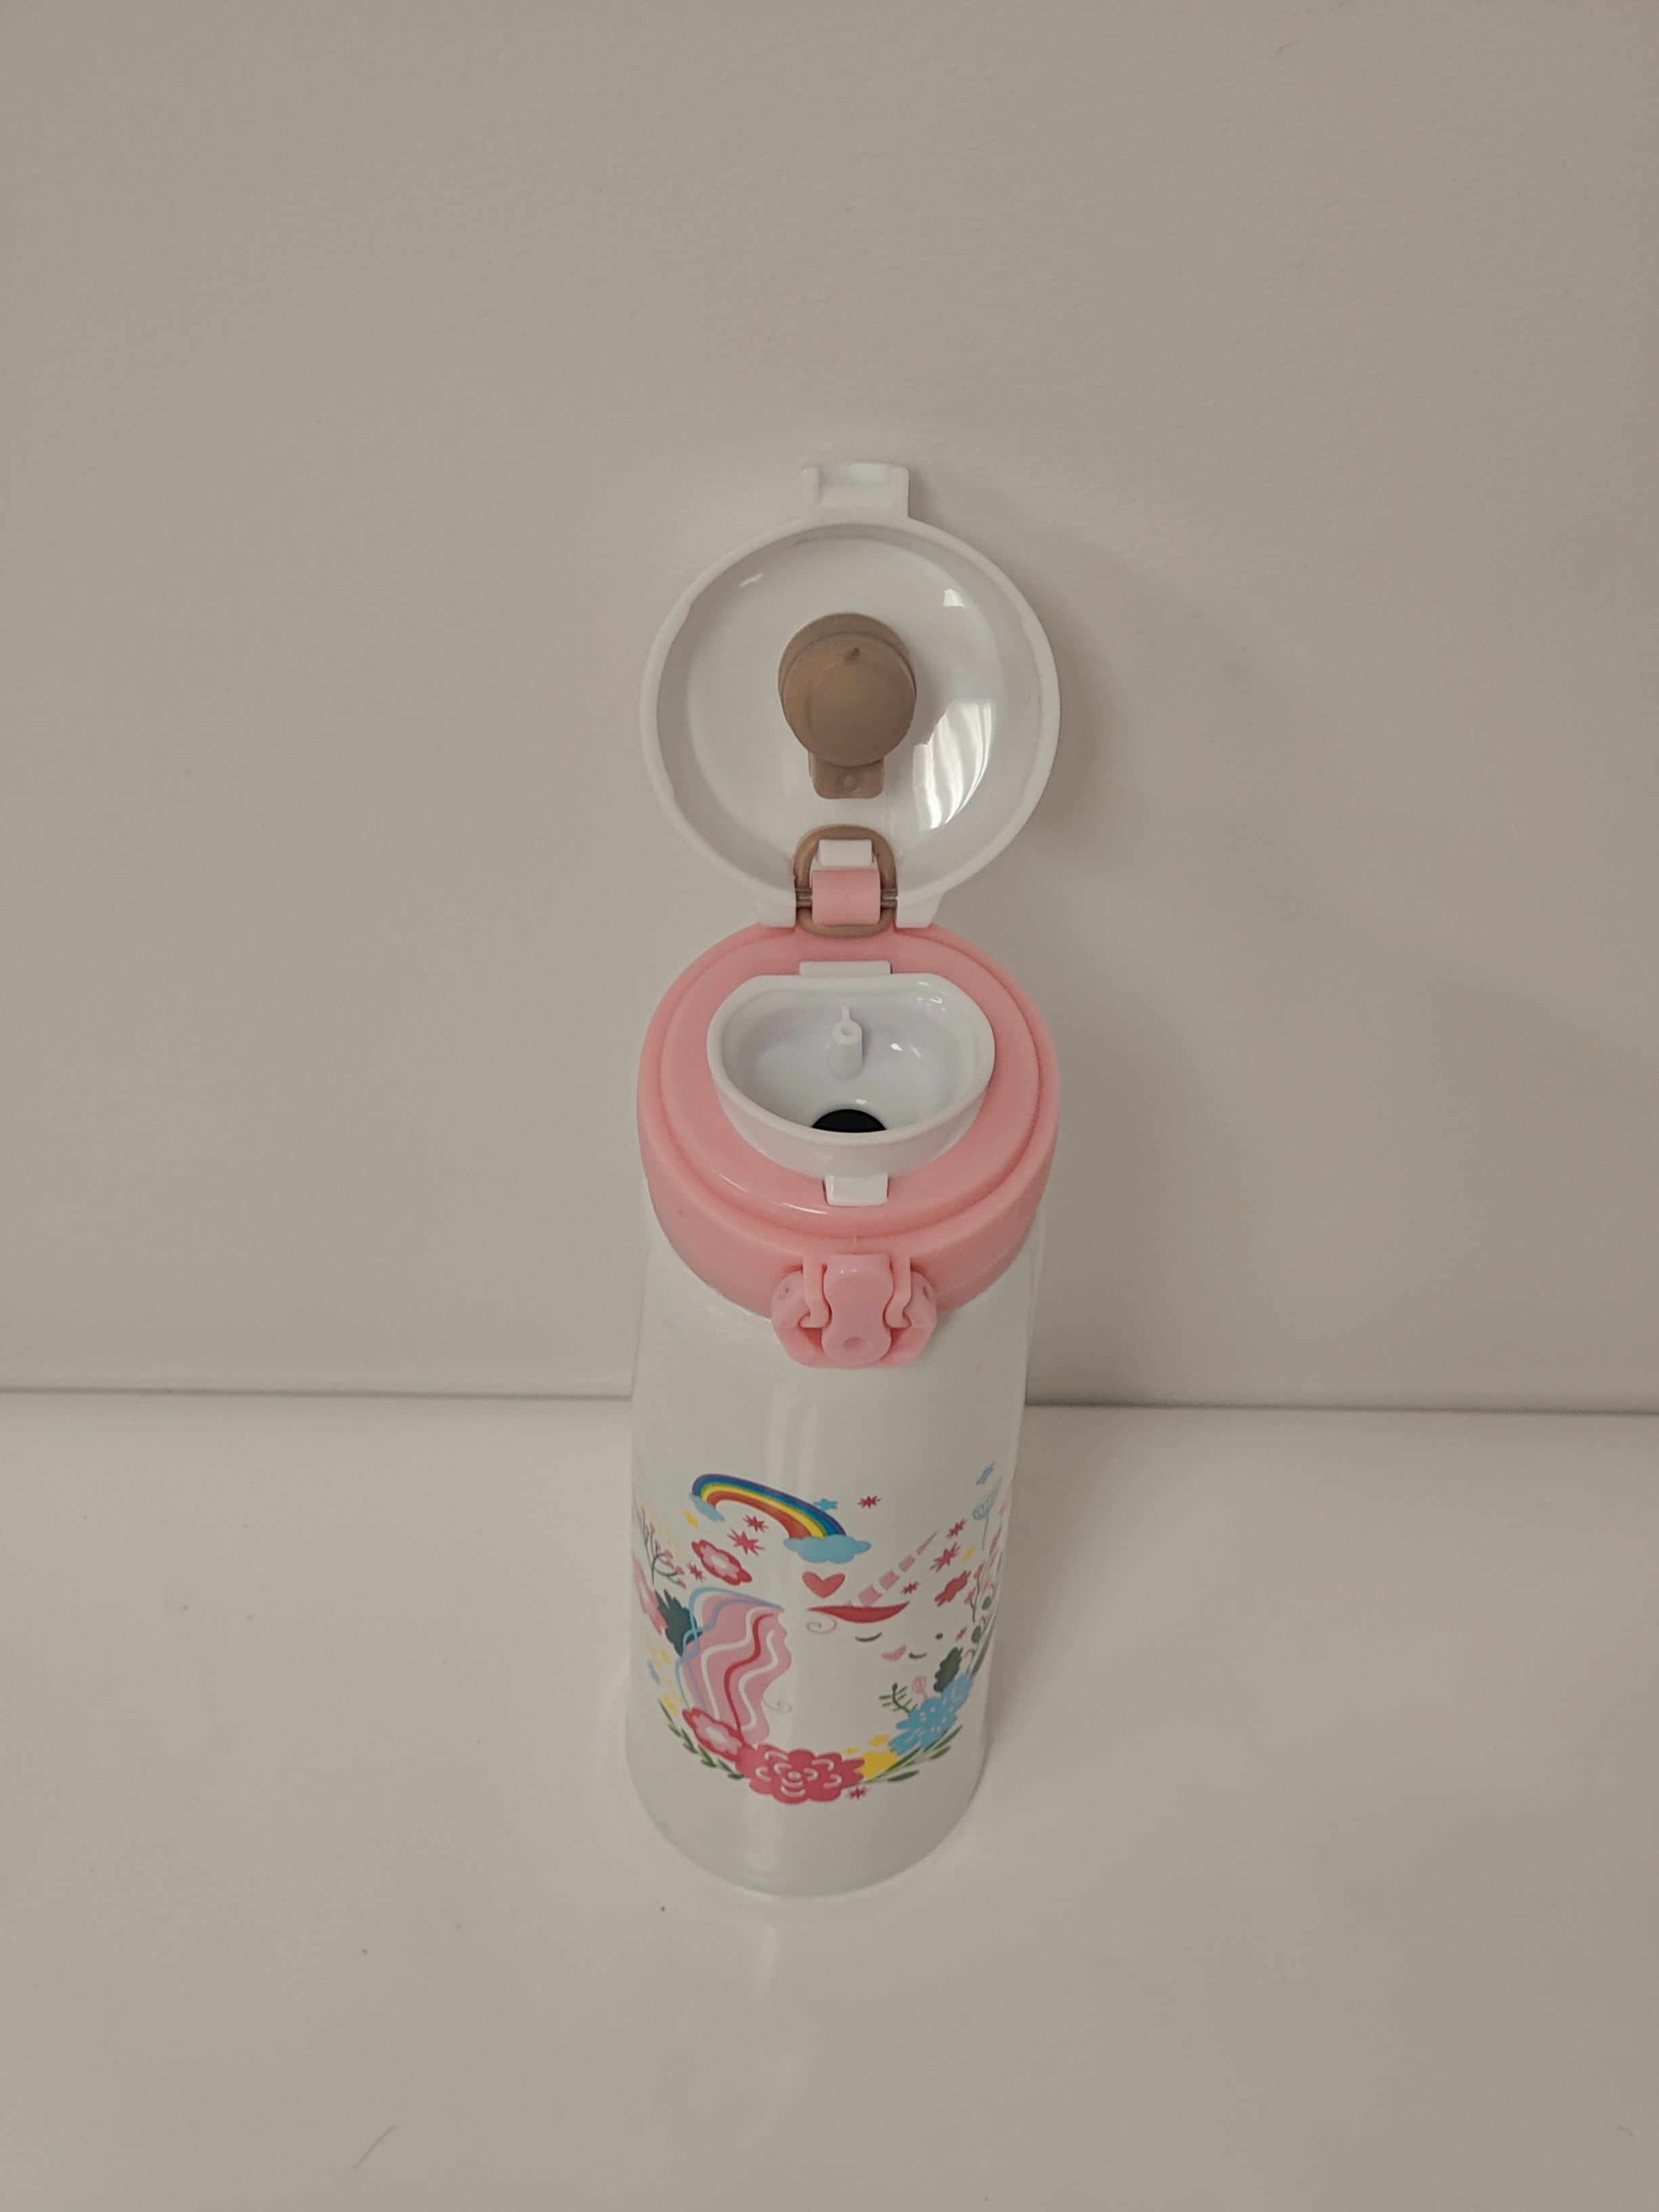 Hello Kitty Pink Solo thermos cup 304 stainless steel 500ml drink cup. 